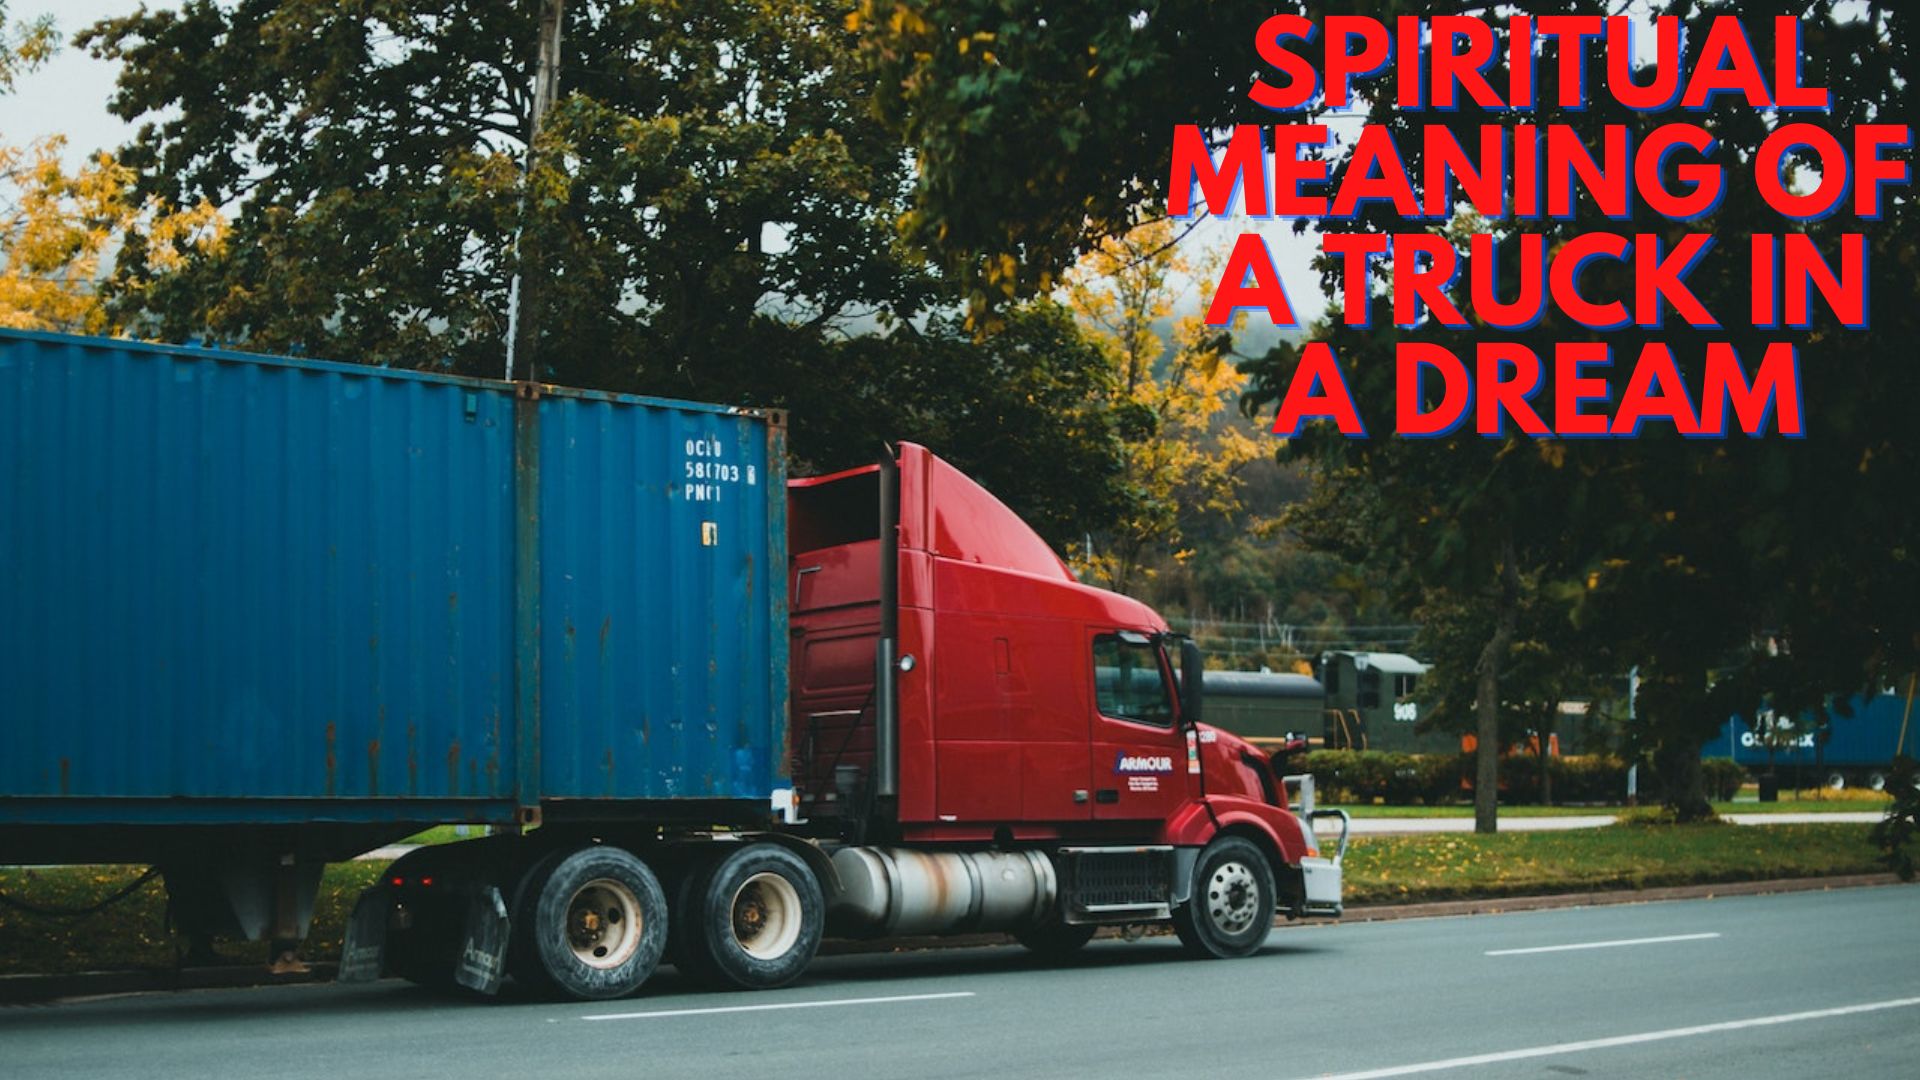 Spiritual Meaning Of A Truck In A Dream - A Symbol Reflects Optimism